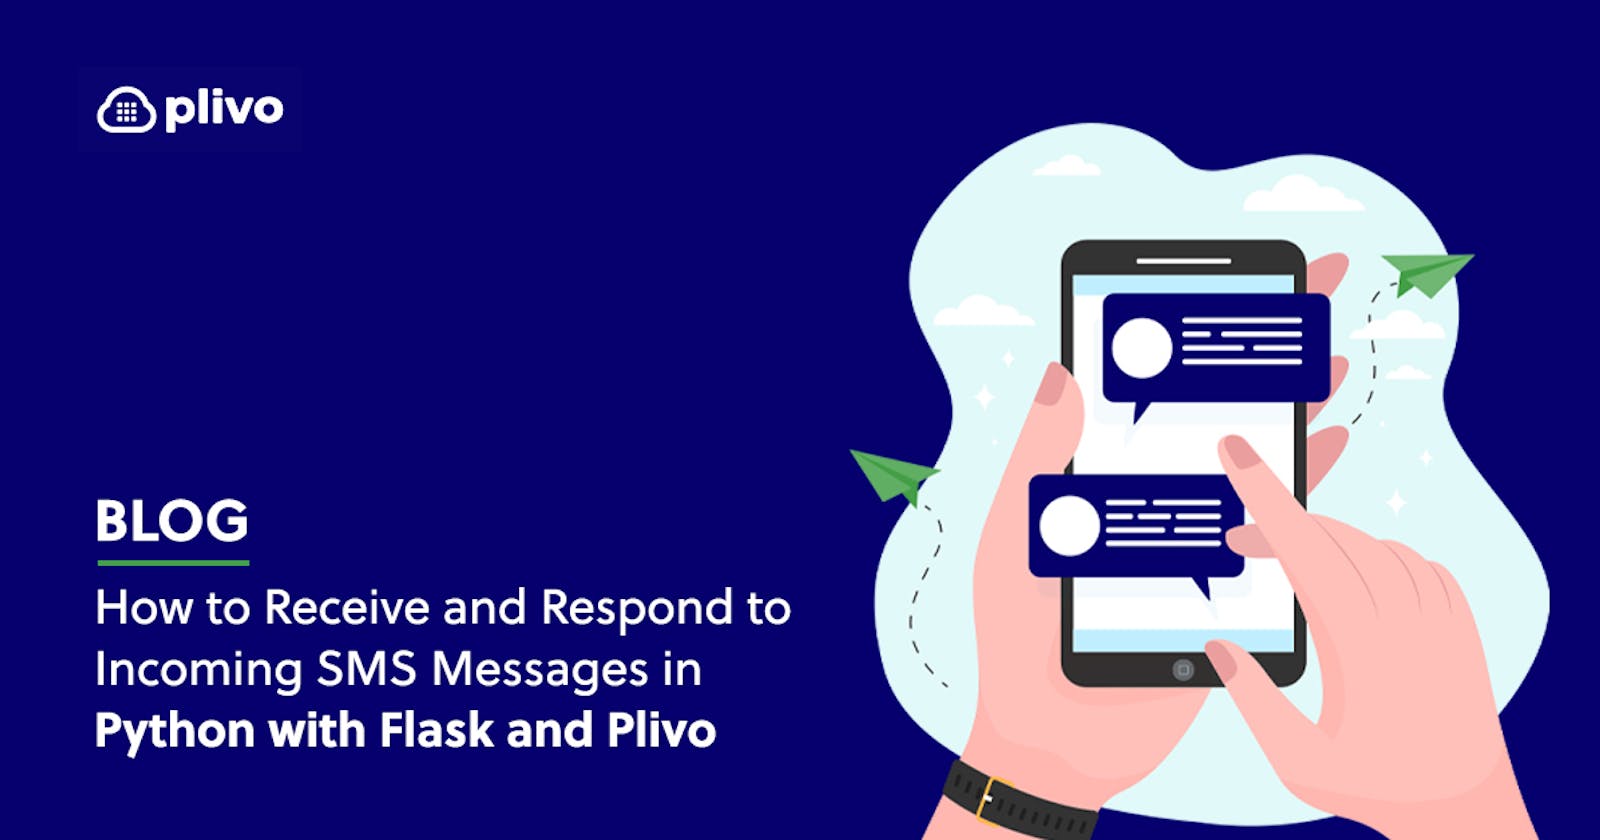 How to Receive and Respond to Incoming SMS Messages in Python with Flask and Plivo